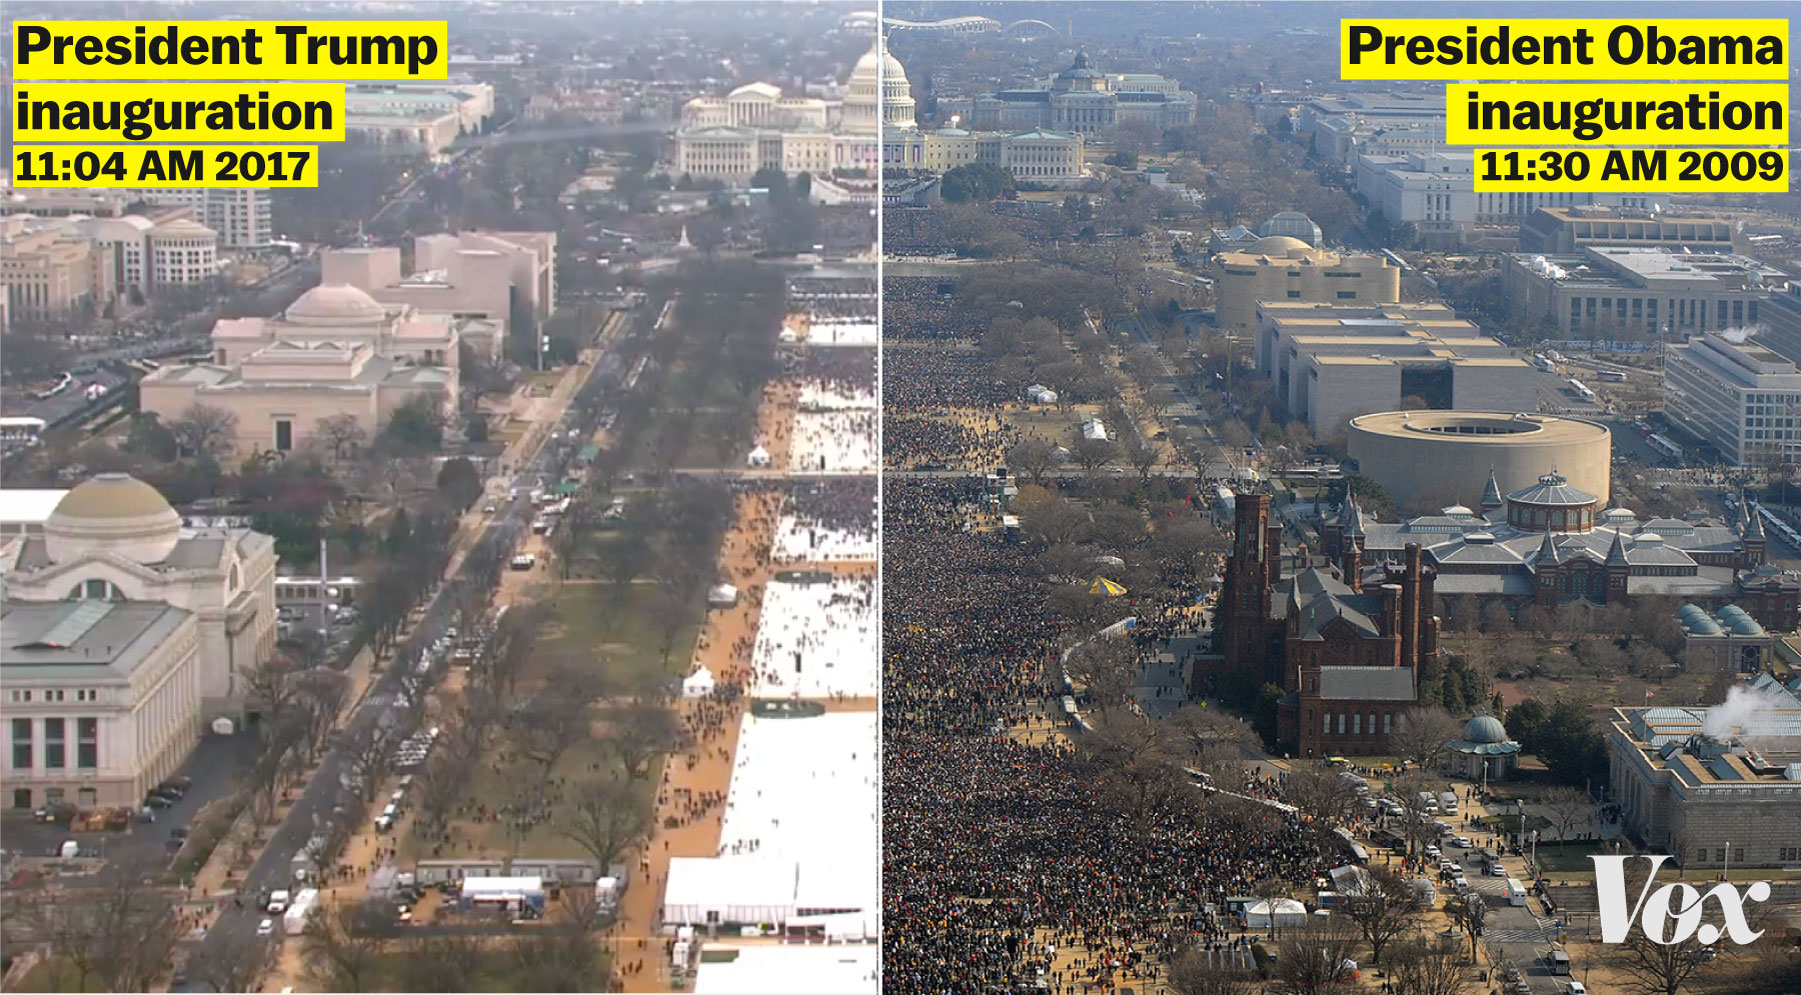 Composite photo comparing the crowds at the 2009 and 2017 inaugurations